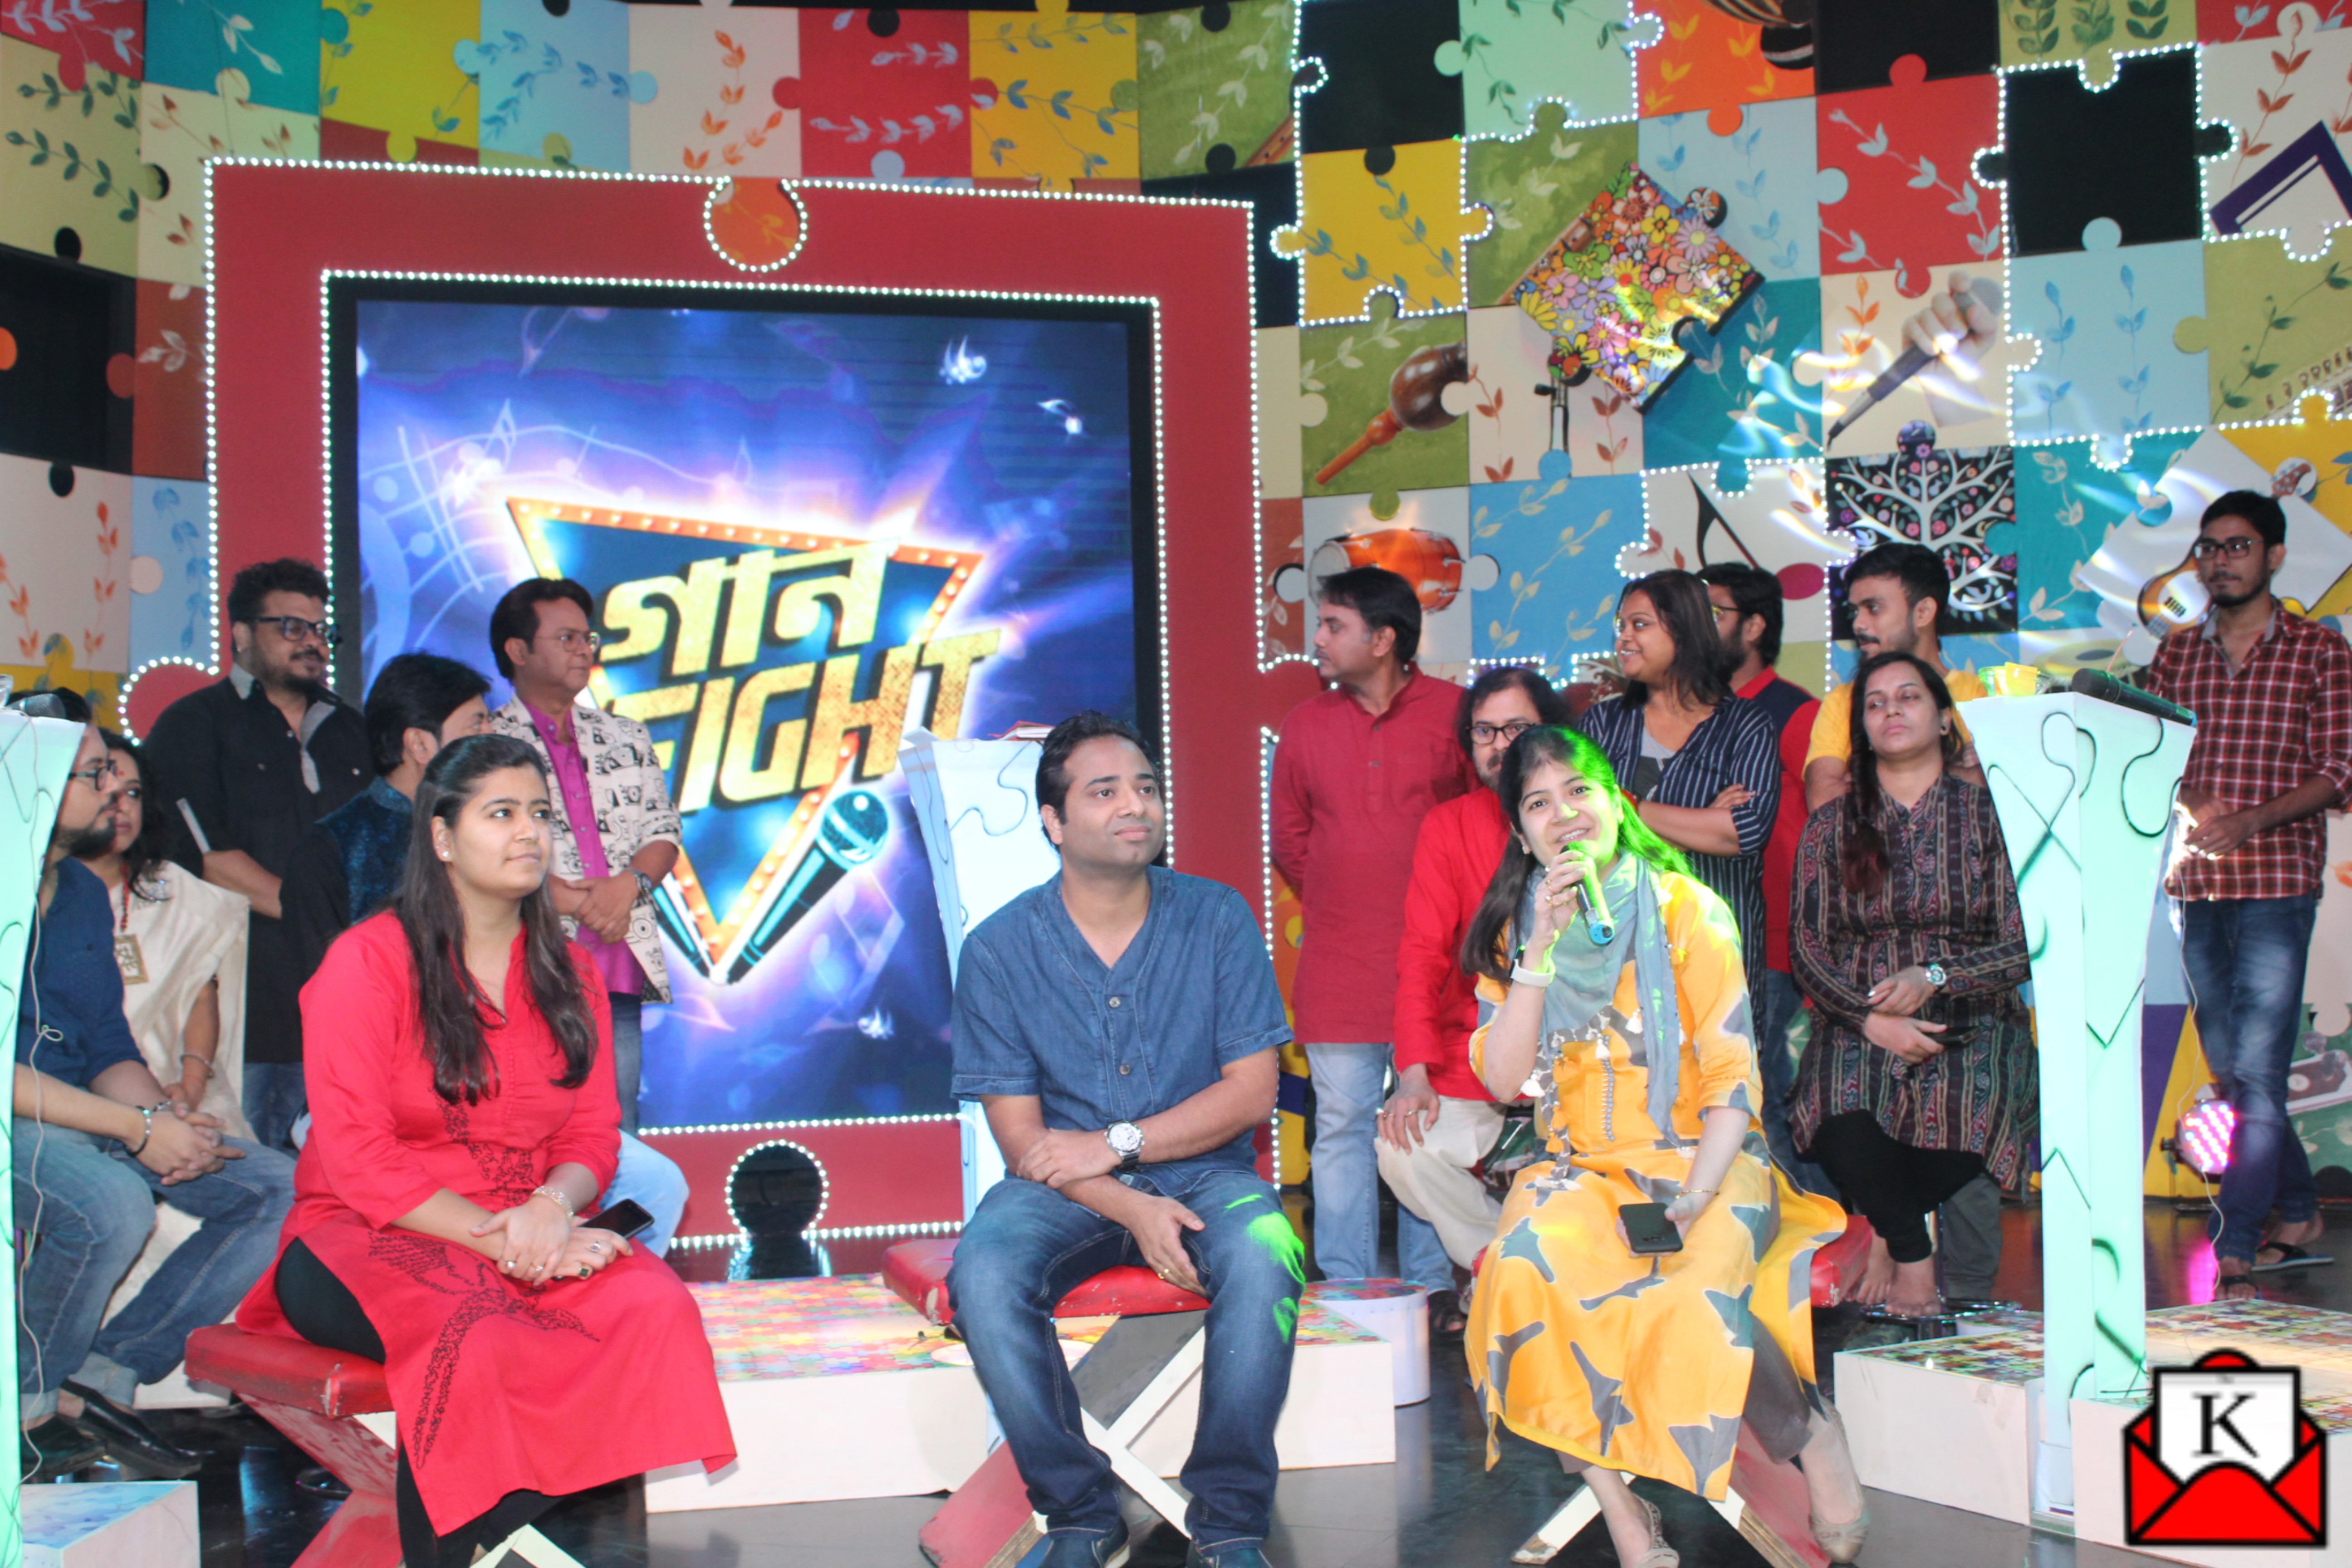 Aakash Aath’s Gaan Fight, Gaan Shune Voting Right to Show Musical Fight Between Musicians